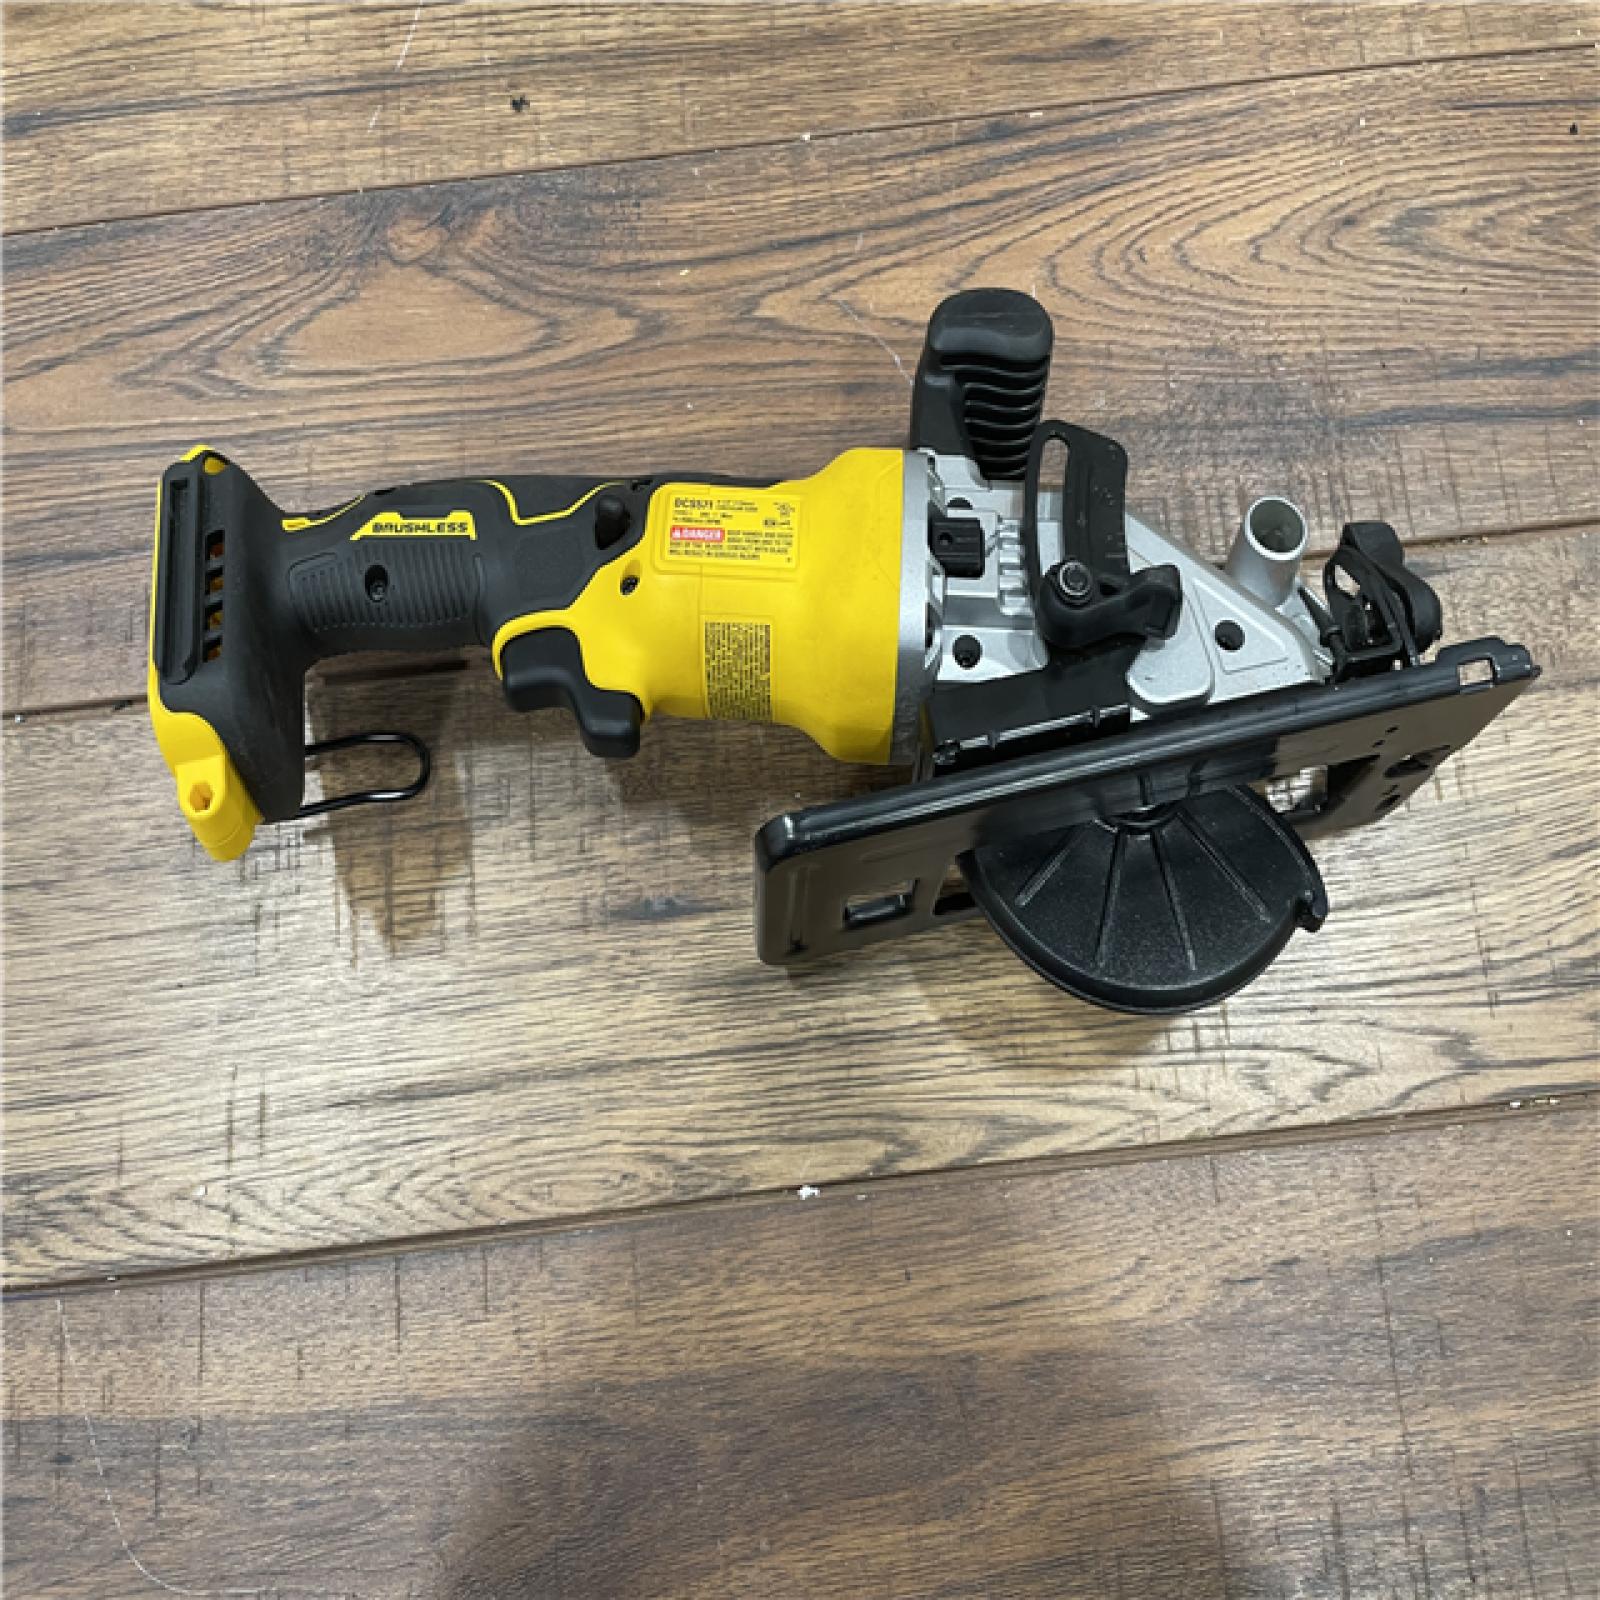 AS-IS DEWALT ATOMIC 20V MAX Cordless Brushless 4-1/2 in. Circular Saw (Tool Only)